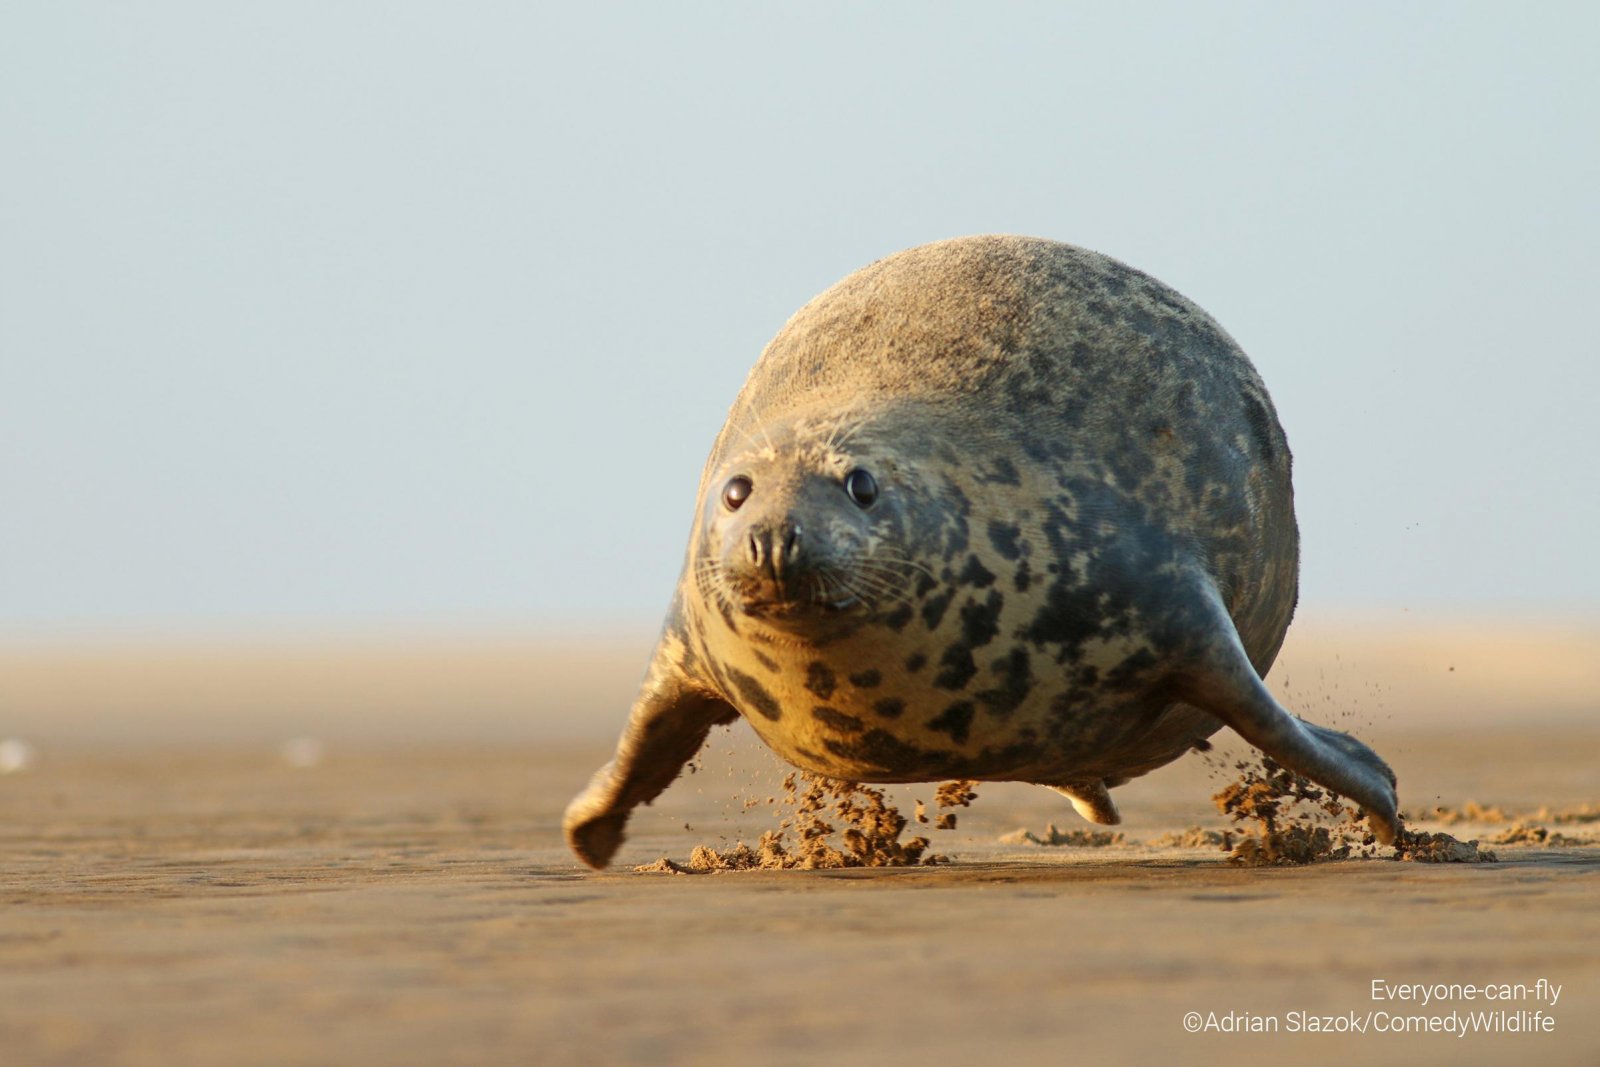 A spotty seal jumping on the sand